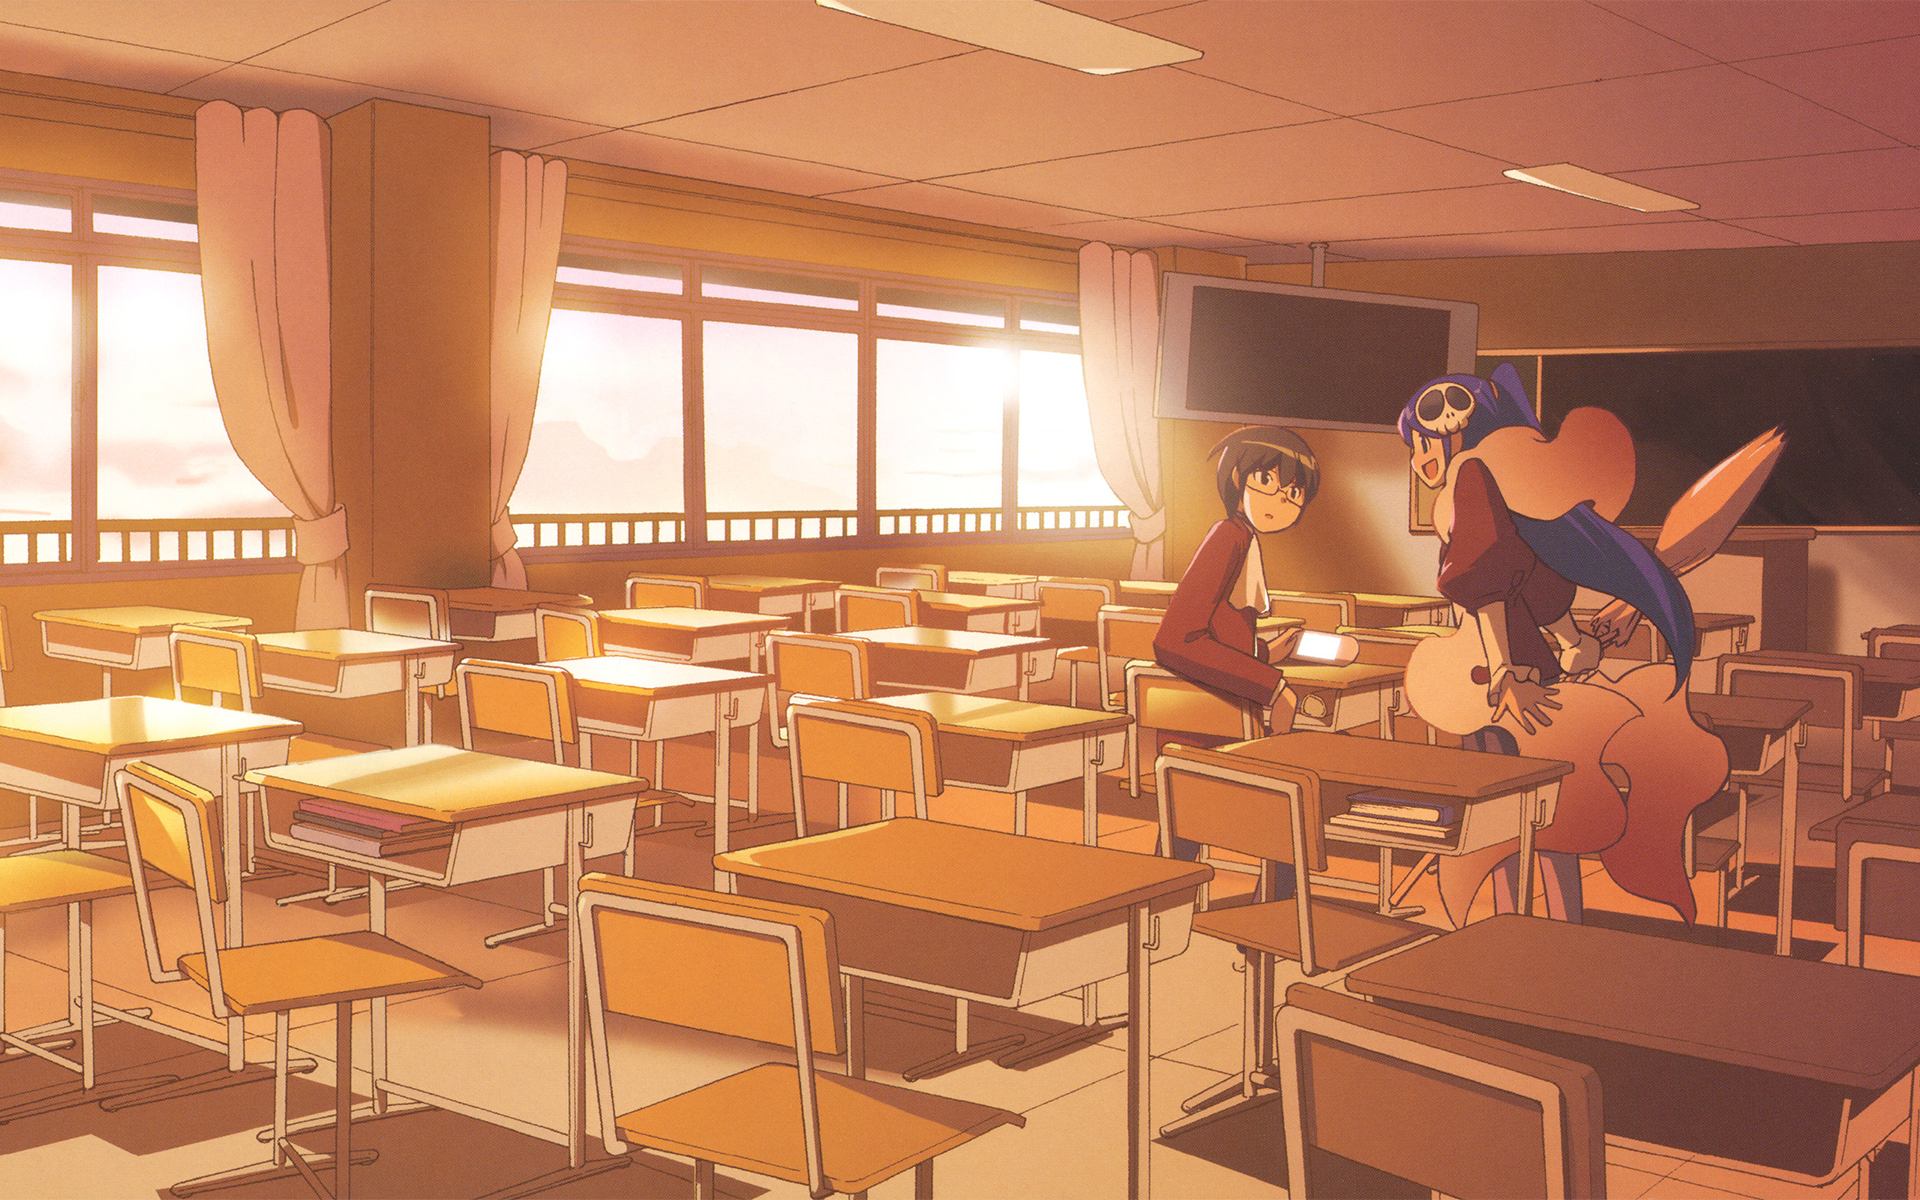 Classroom The Wallpaper 1920x1200 Classroom The World God Only 1920x1200